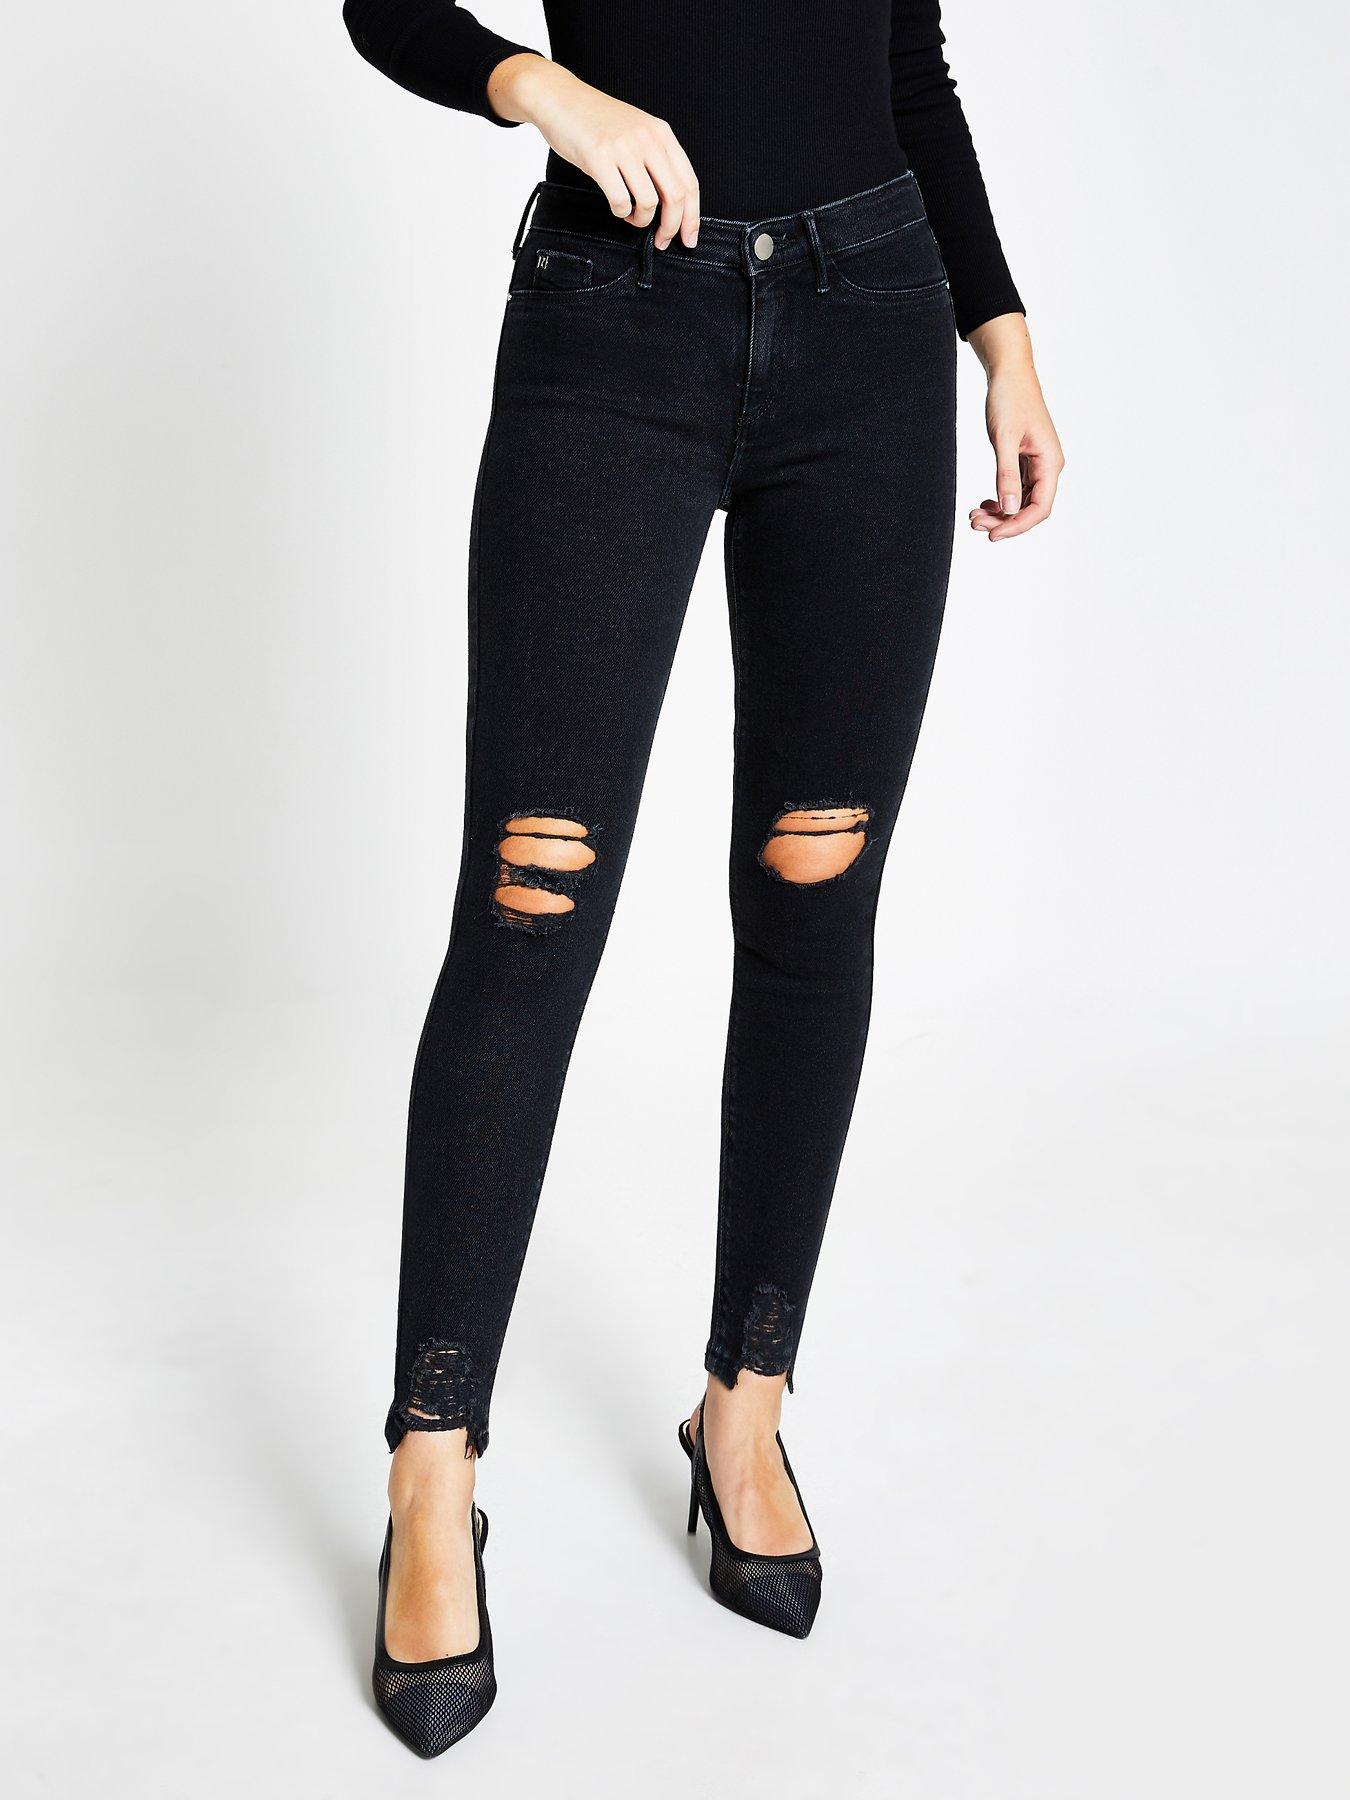 river island ripped jeans